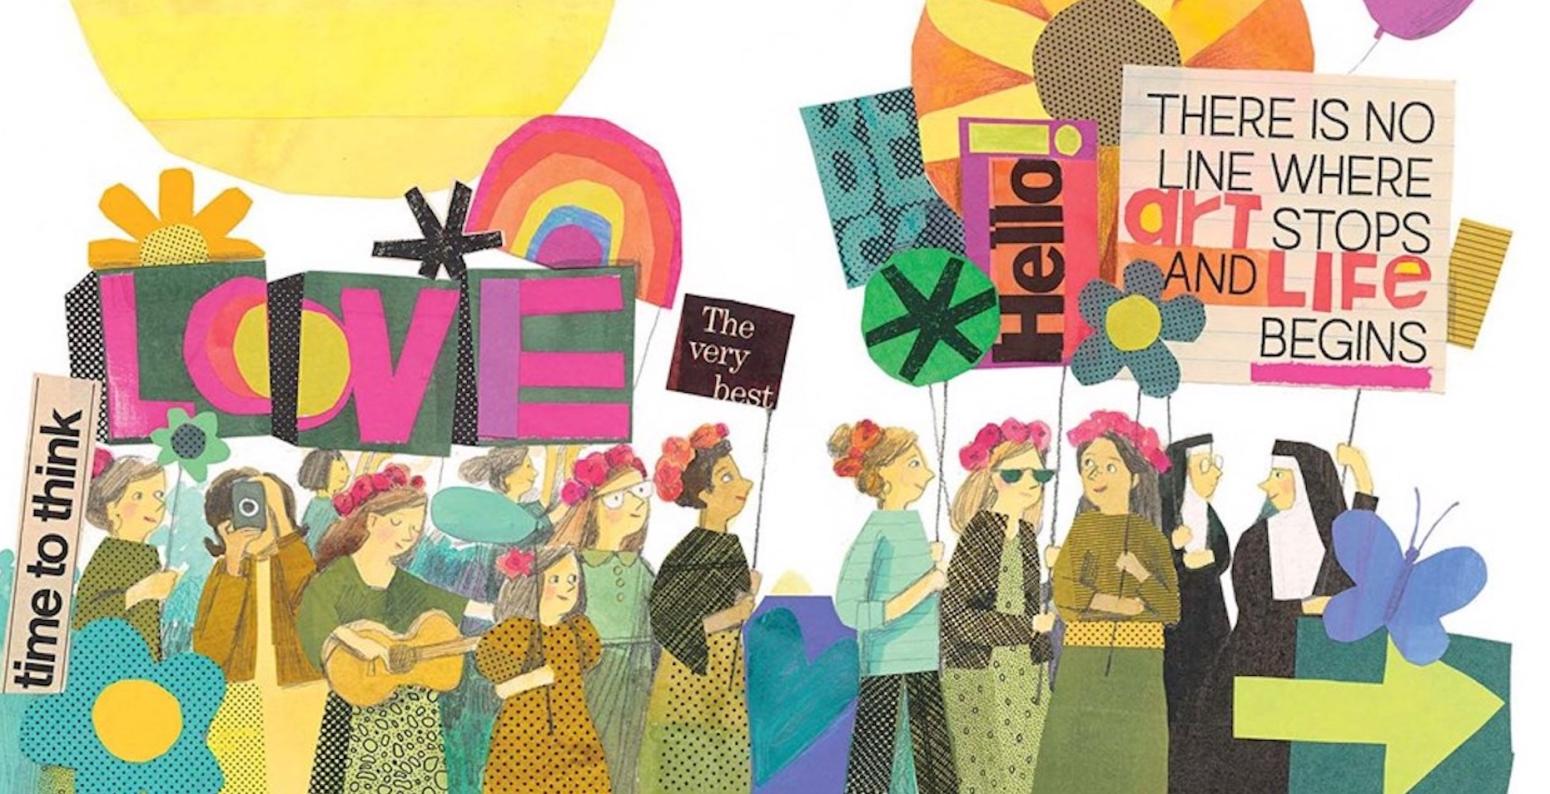 Collage of people holding different signs, including "Love," "Hello!," and "There is no line where art stops and life begins."